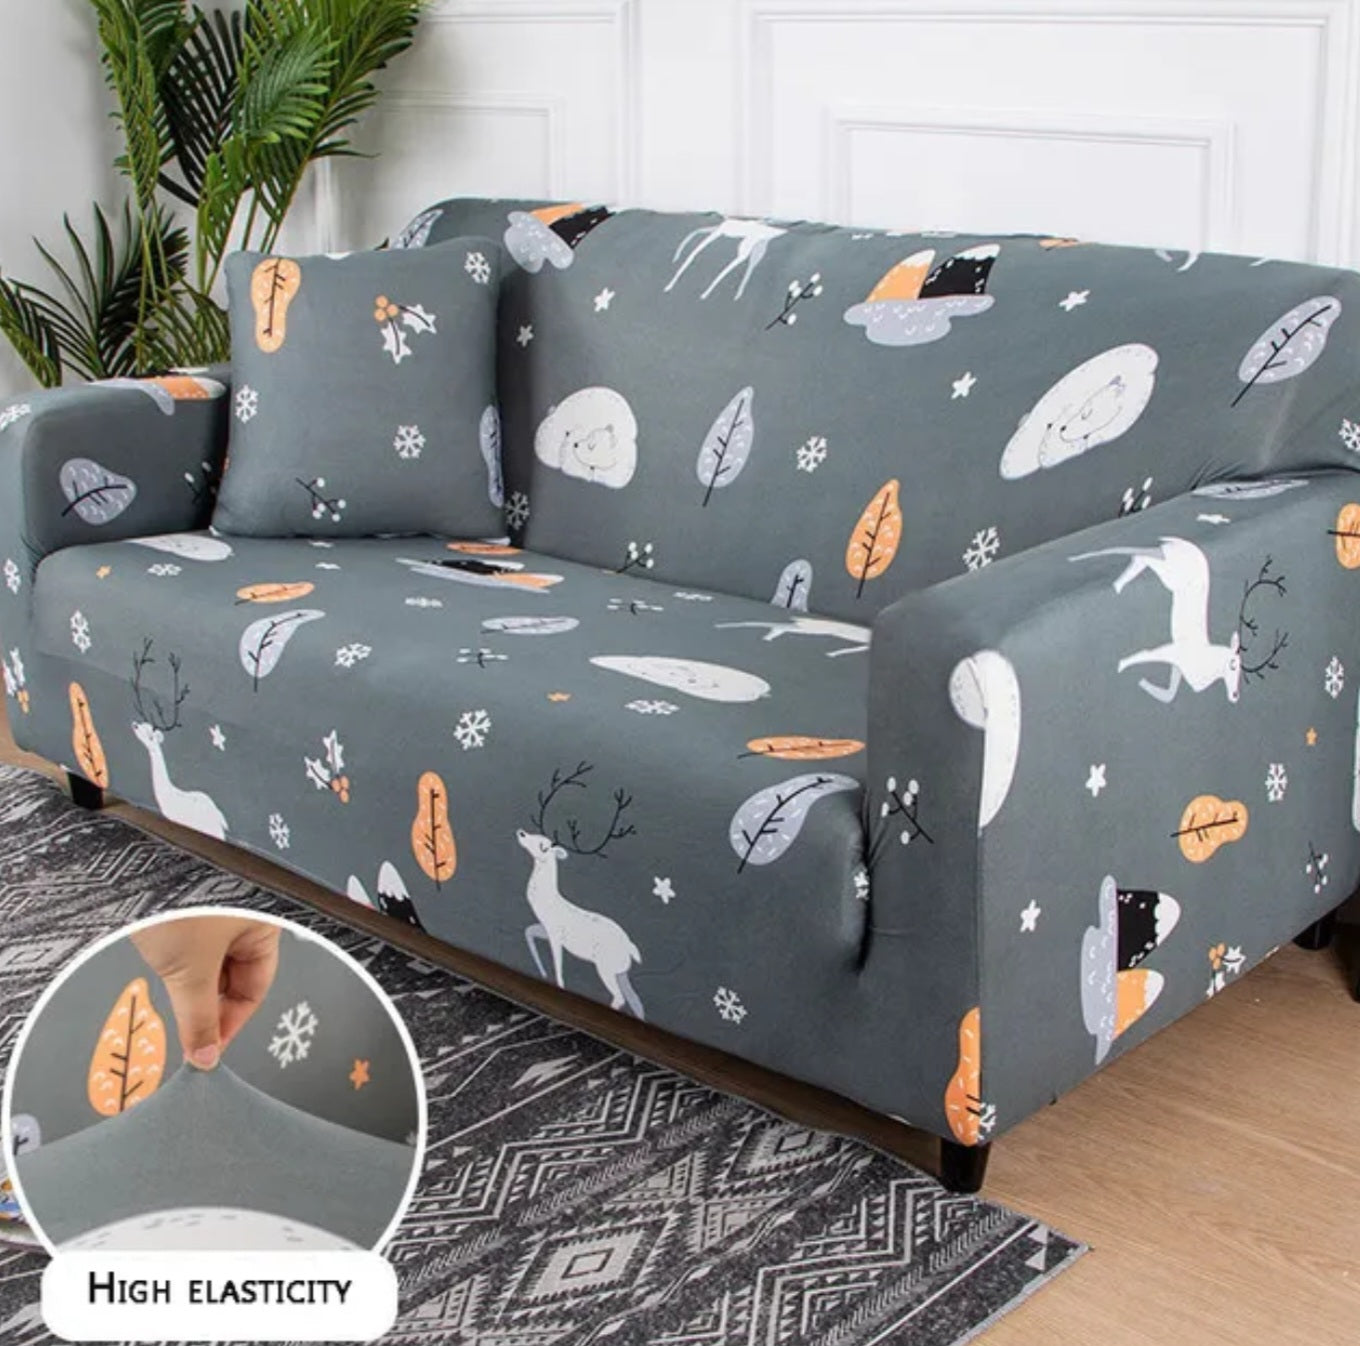 Elastic sofa covers smooth surface, water-repellent various patterns